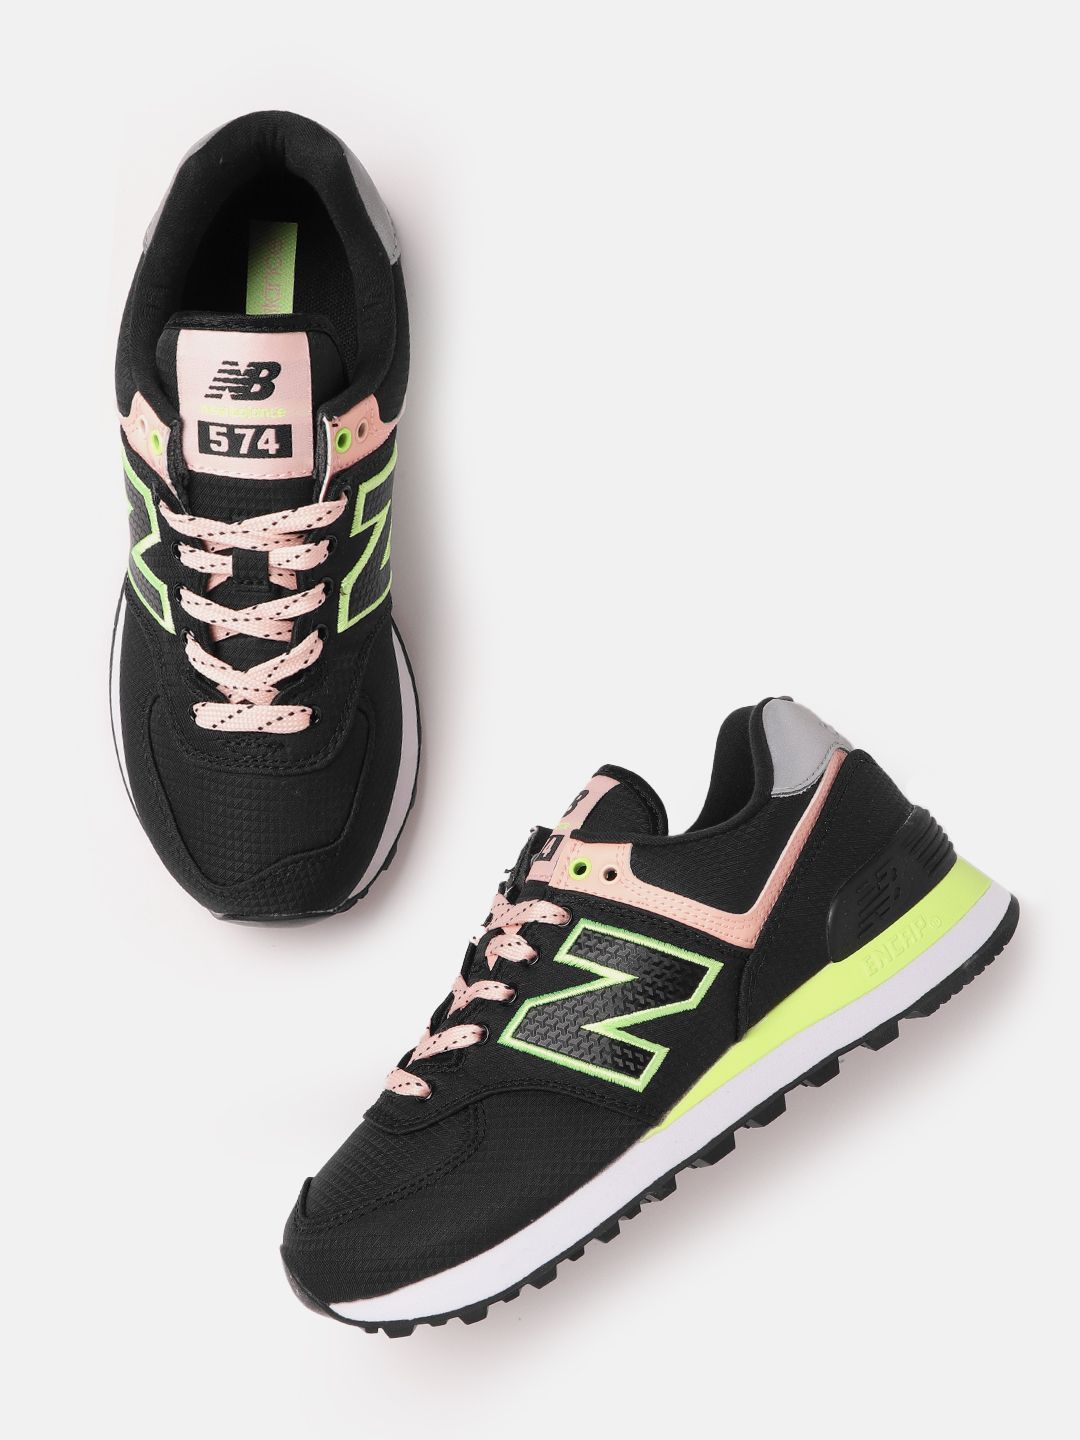 New Balance Women Black & Green Woven Design Suede Sneakers Excluding Trims Price in India